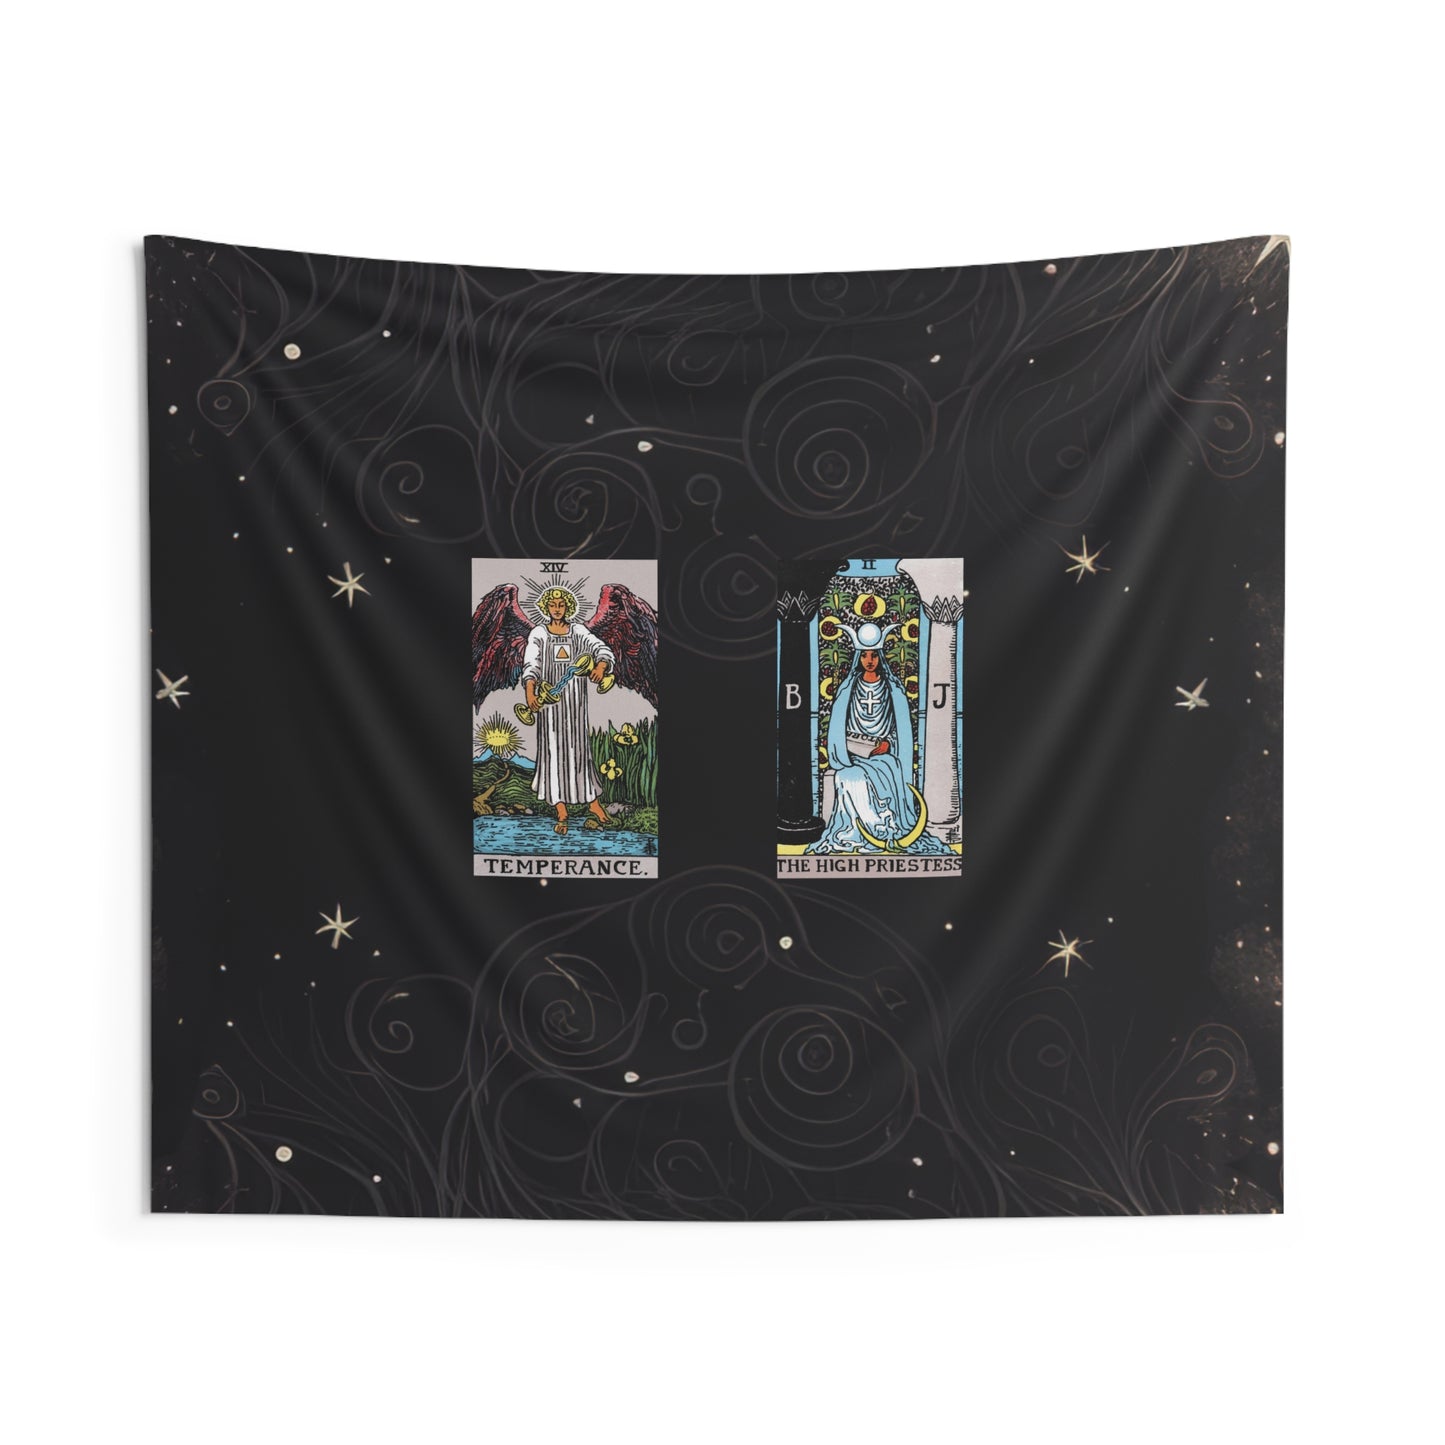 The Temperance AND The High priestess Tarot Cards Altar Cloth or Tapestry with Starry Background